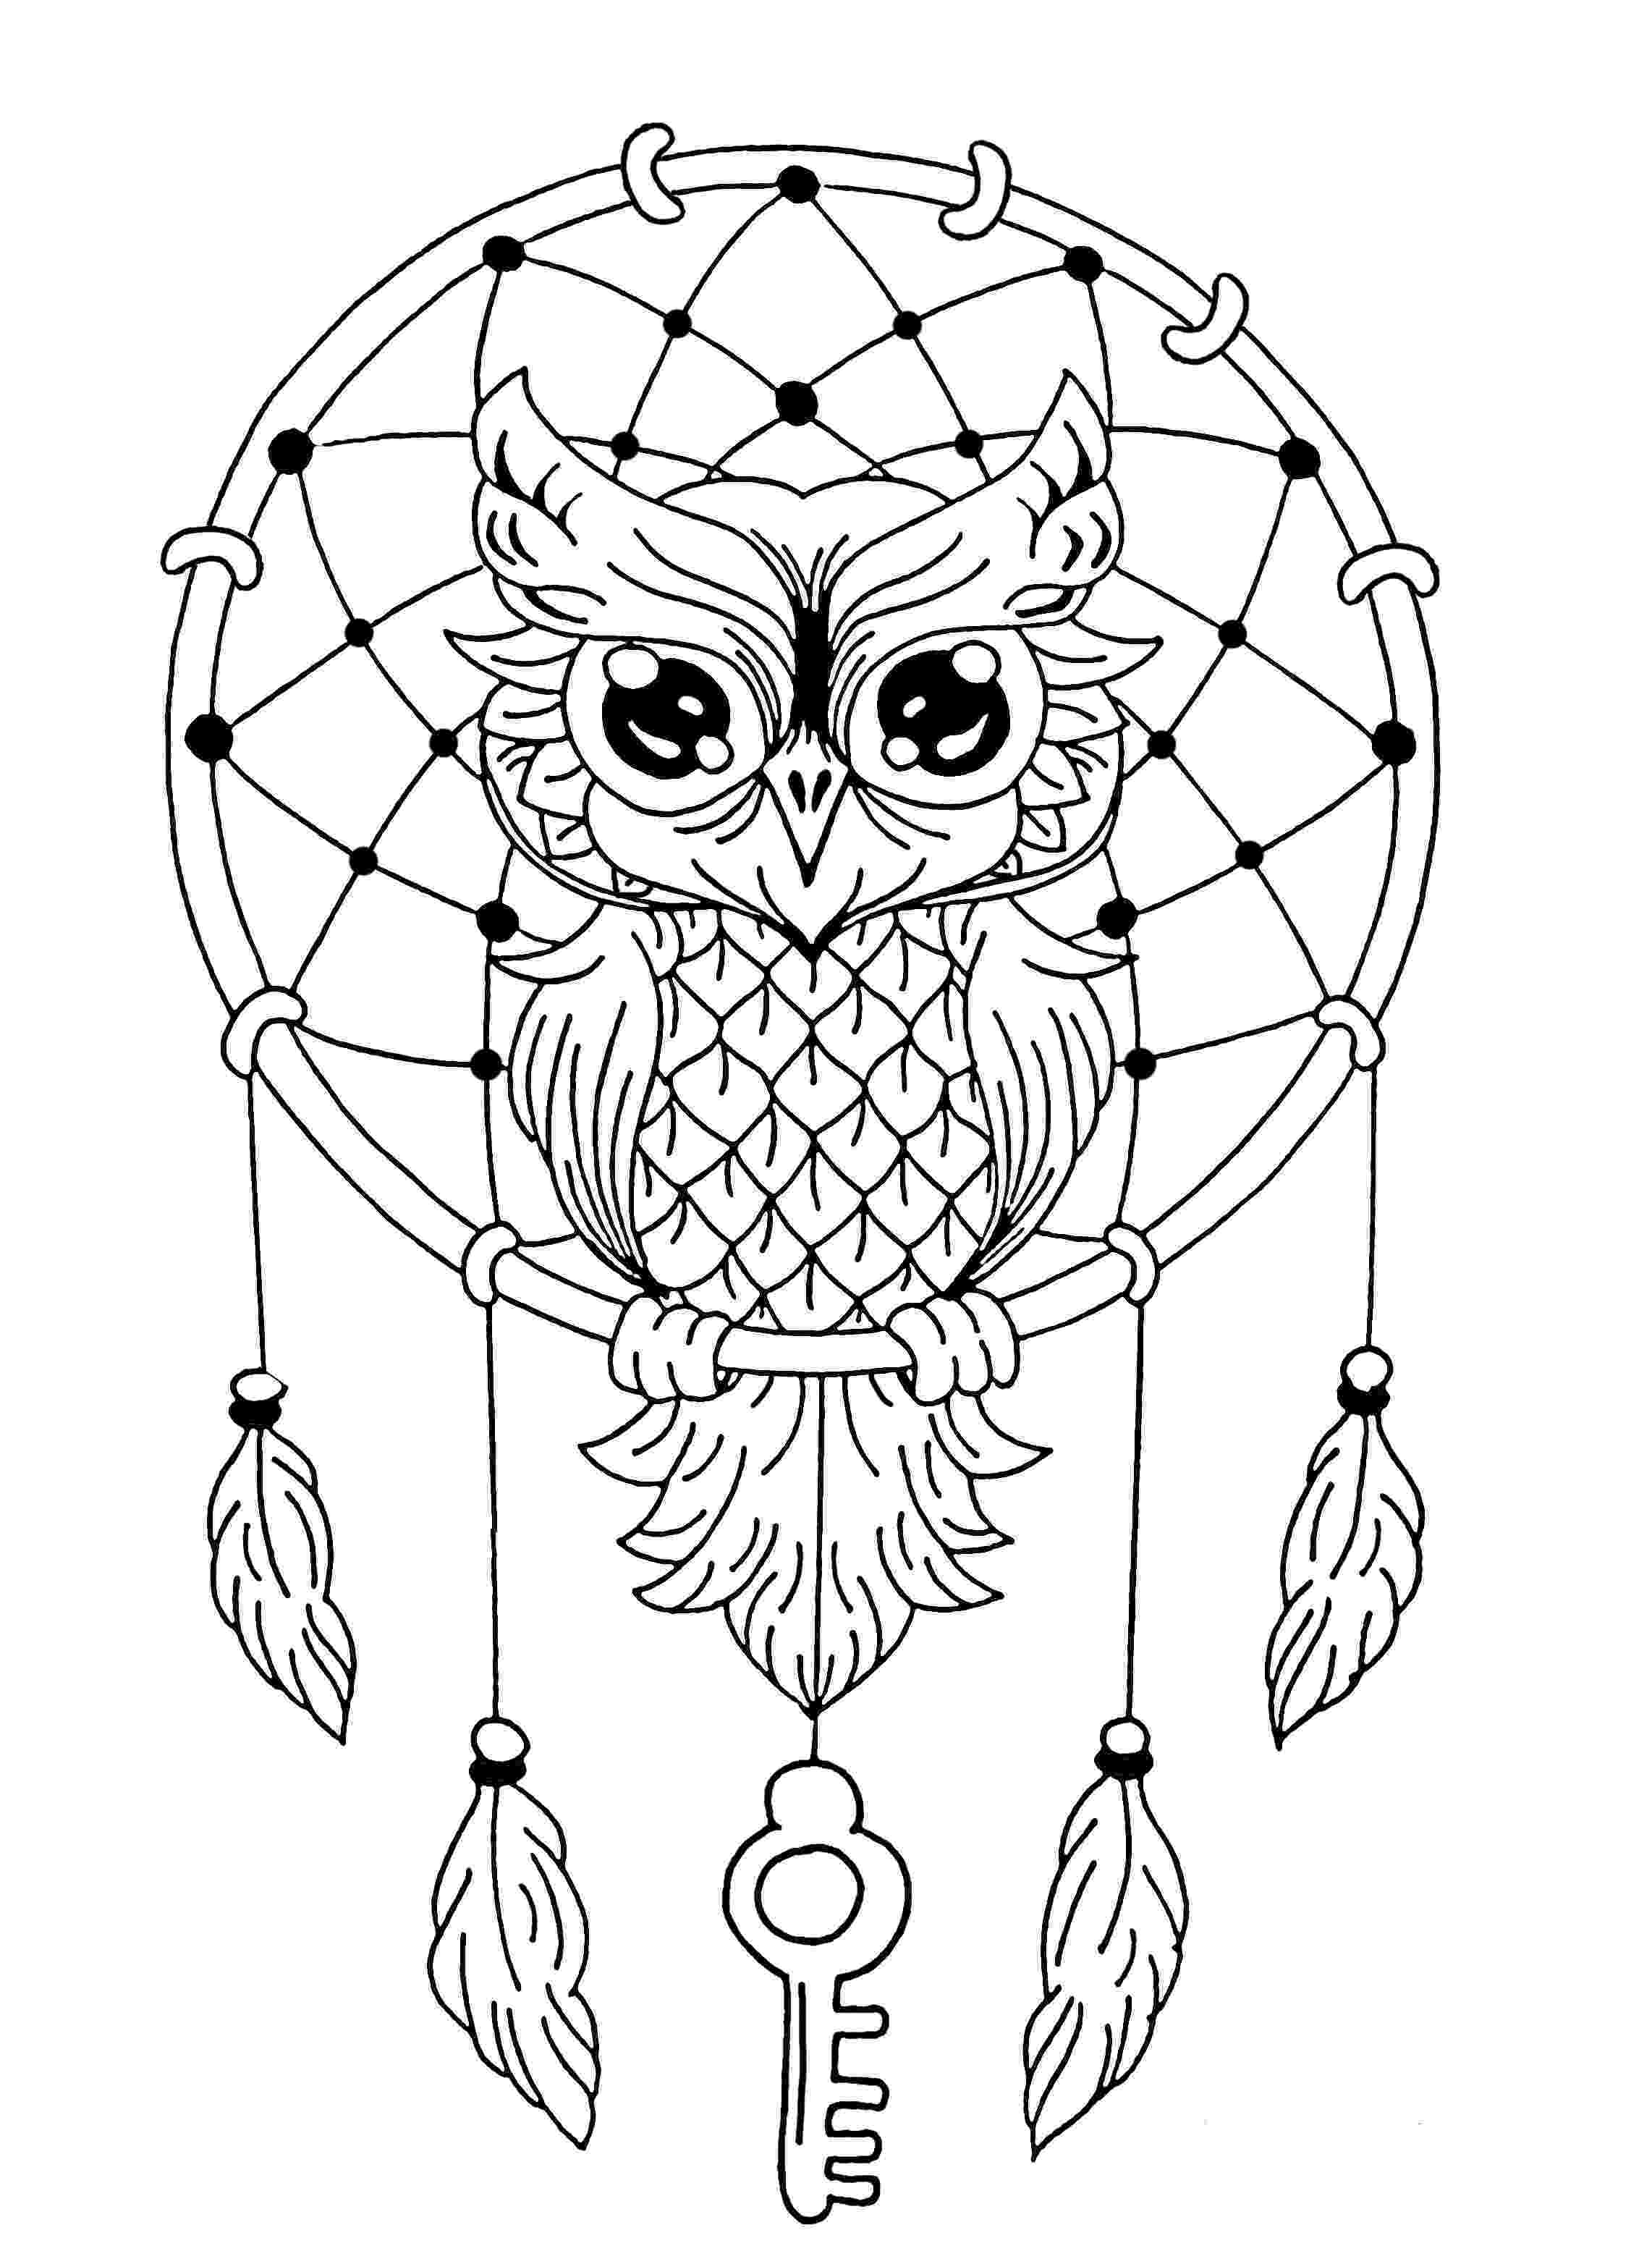 coloring owl owl coloring pages for adults free detailed owl coloring coloring owl 